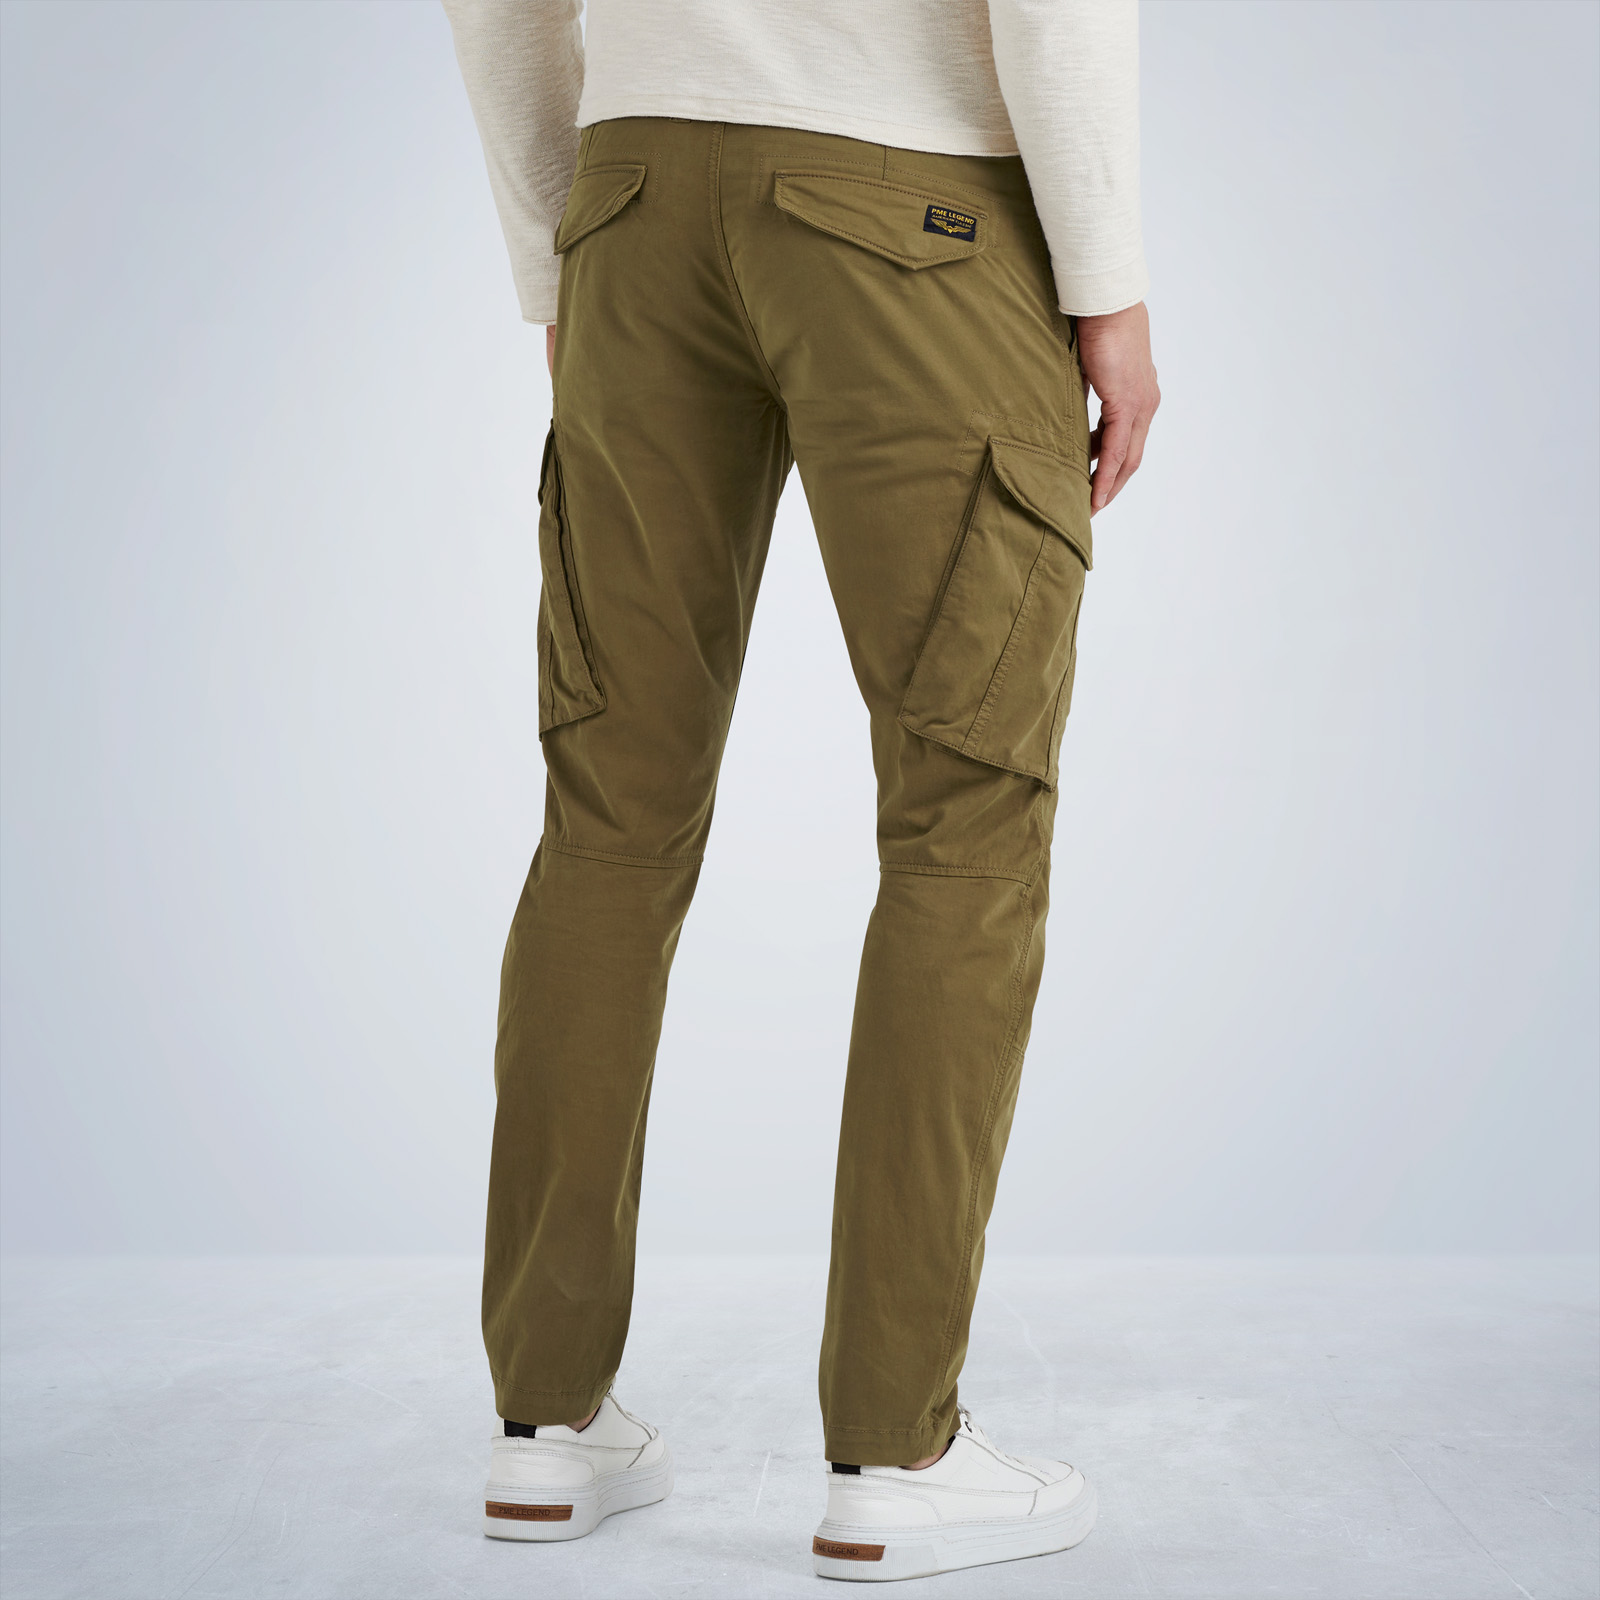 PME and pants fit tapered Nordrop | shipping Free | LEGEND cargo returns